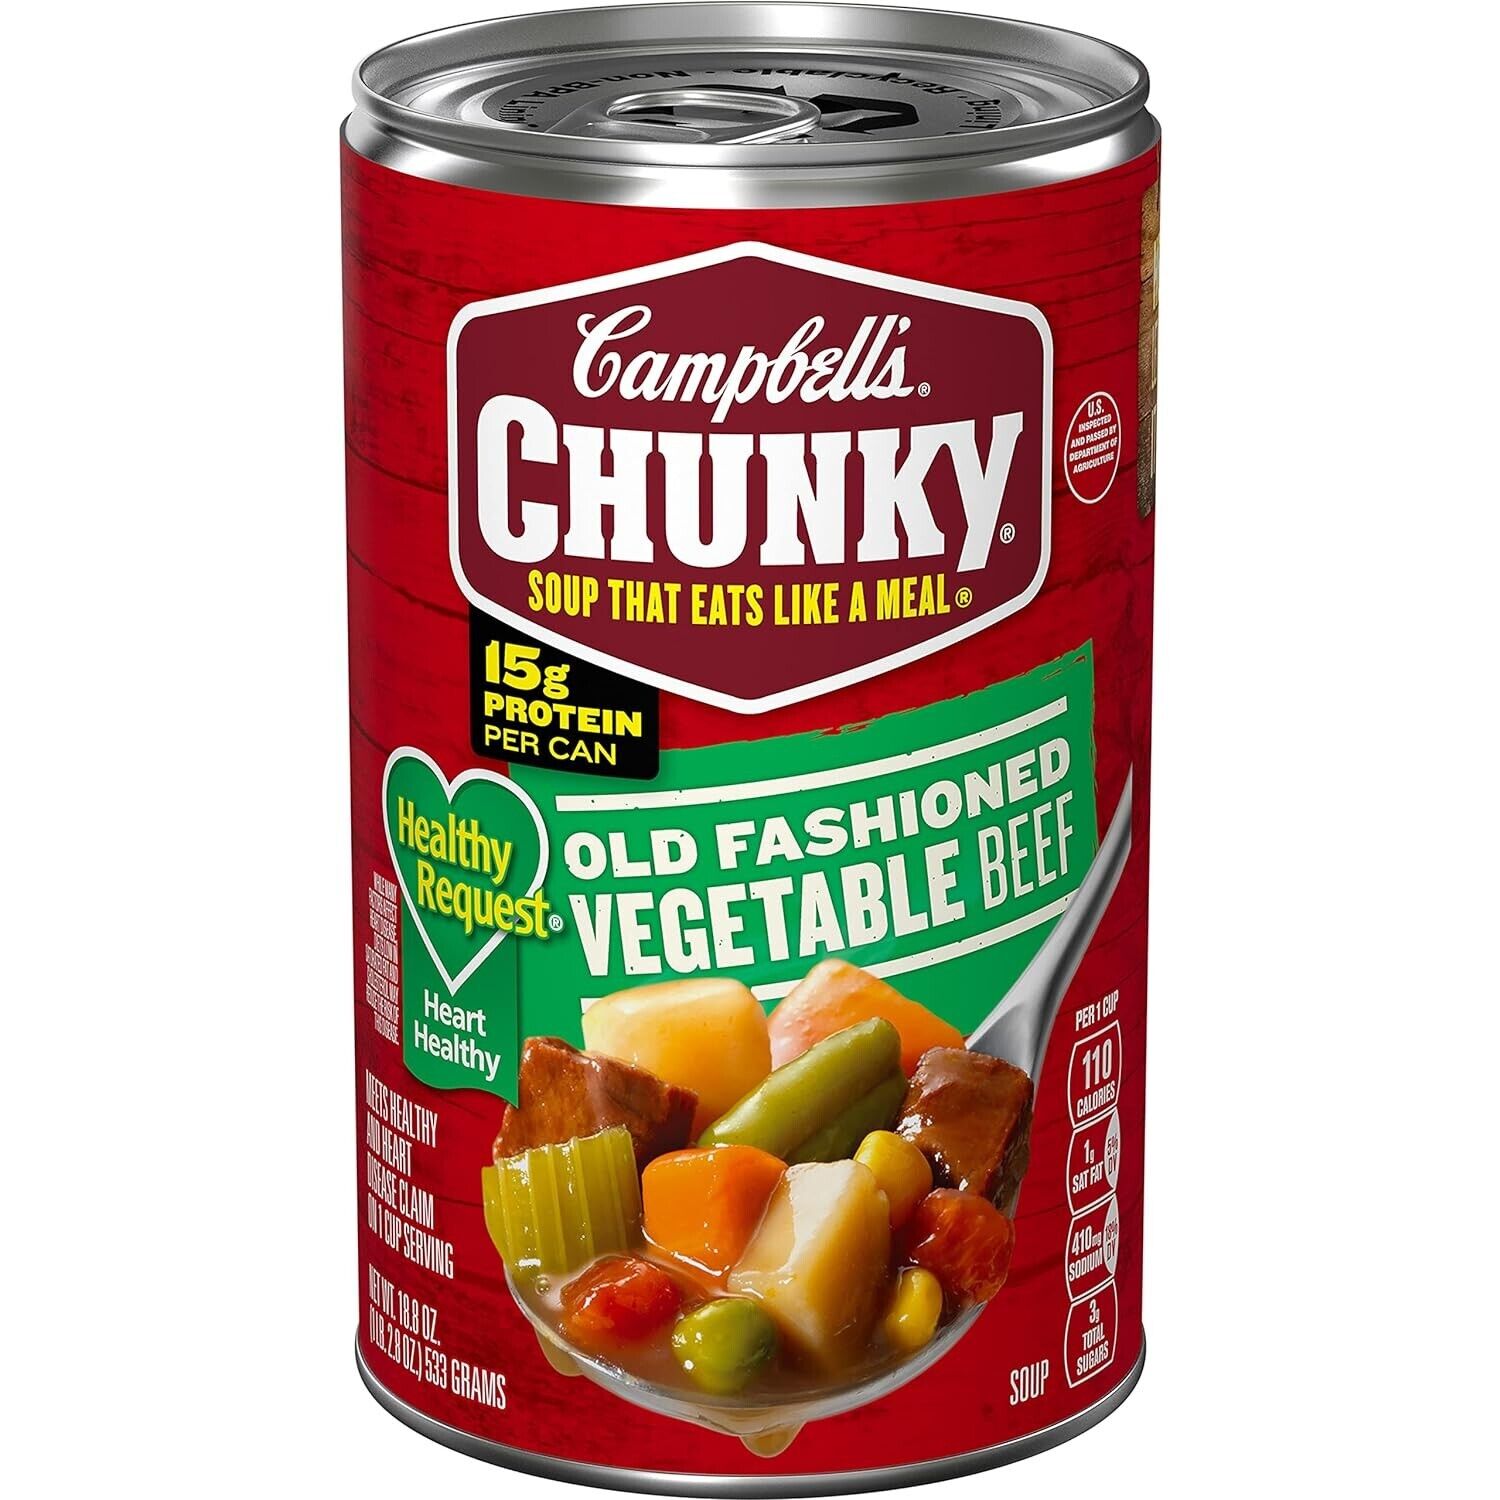 Campbell’s Chunky Healthy Request Soup, Old Fashioned Vegetable Beef Soup, 18.8